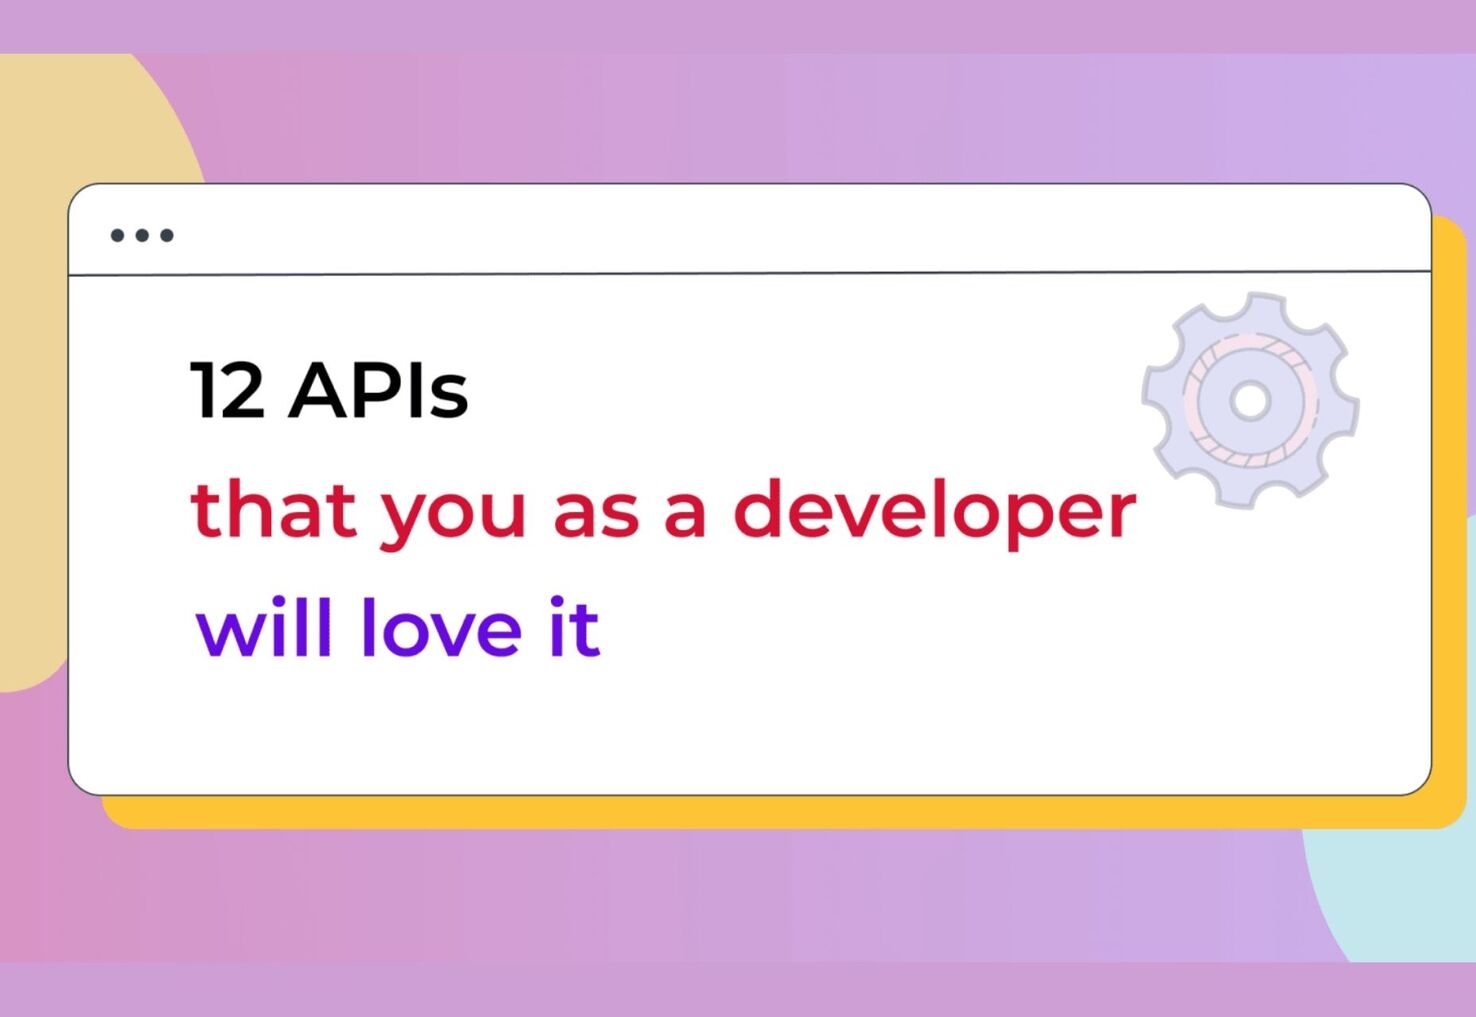 12 apis that developers will love